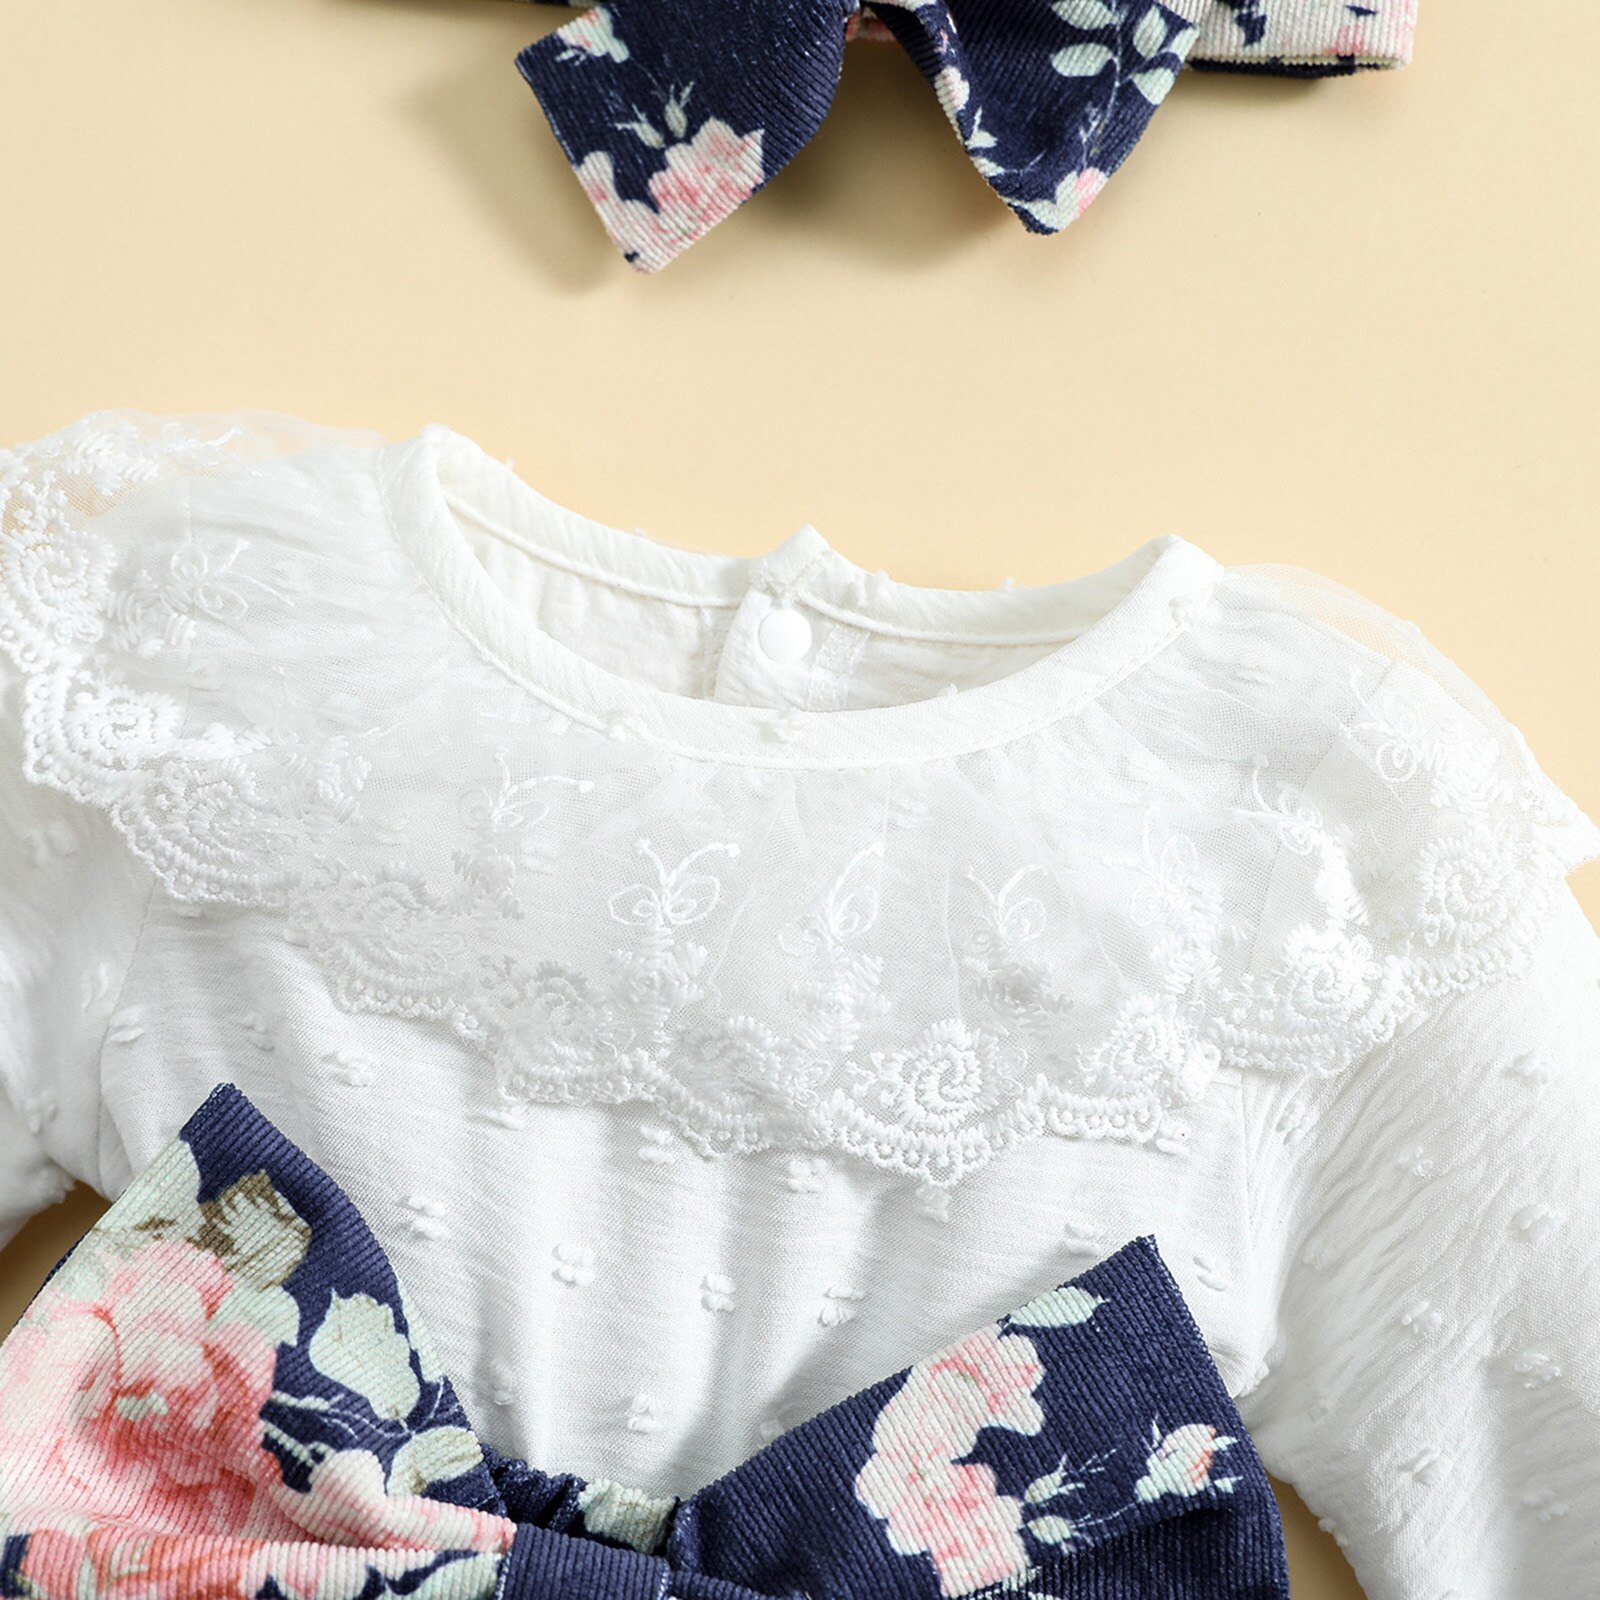 ma-baby-6-24M-Infant-Newborn-Baby-Girl-Dress-Floral-Print-Ruffle-Bow-A-line-Dresses-5